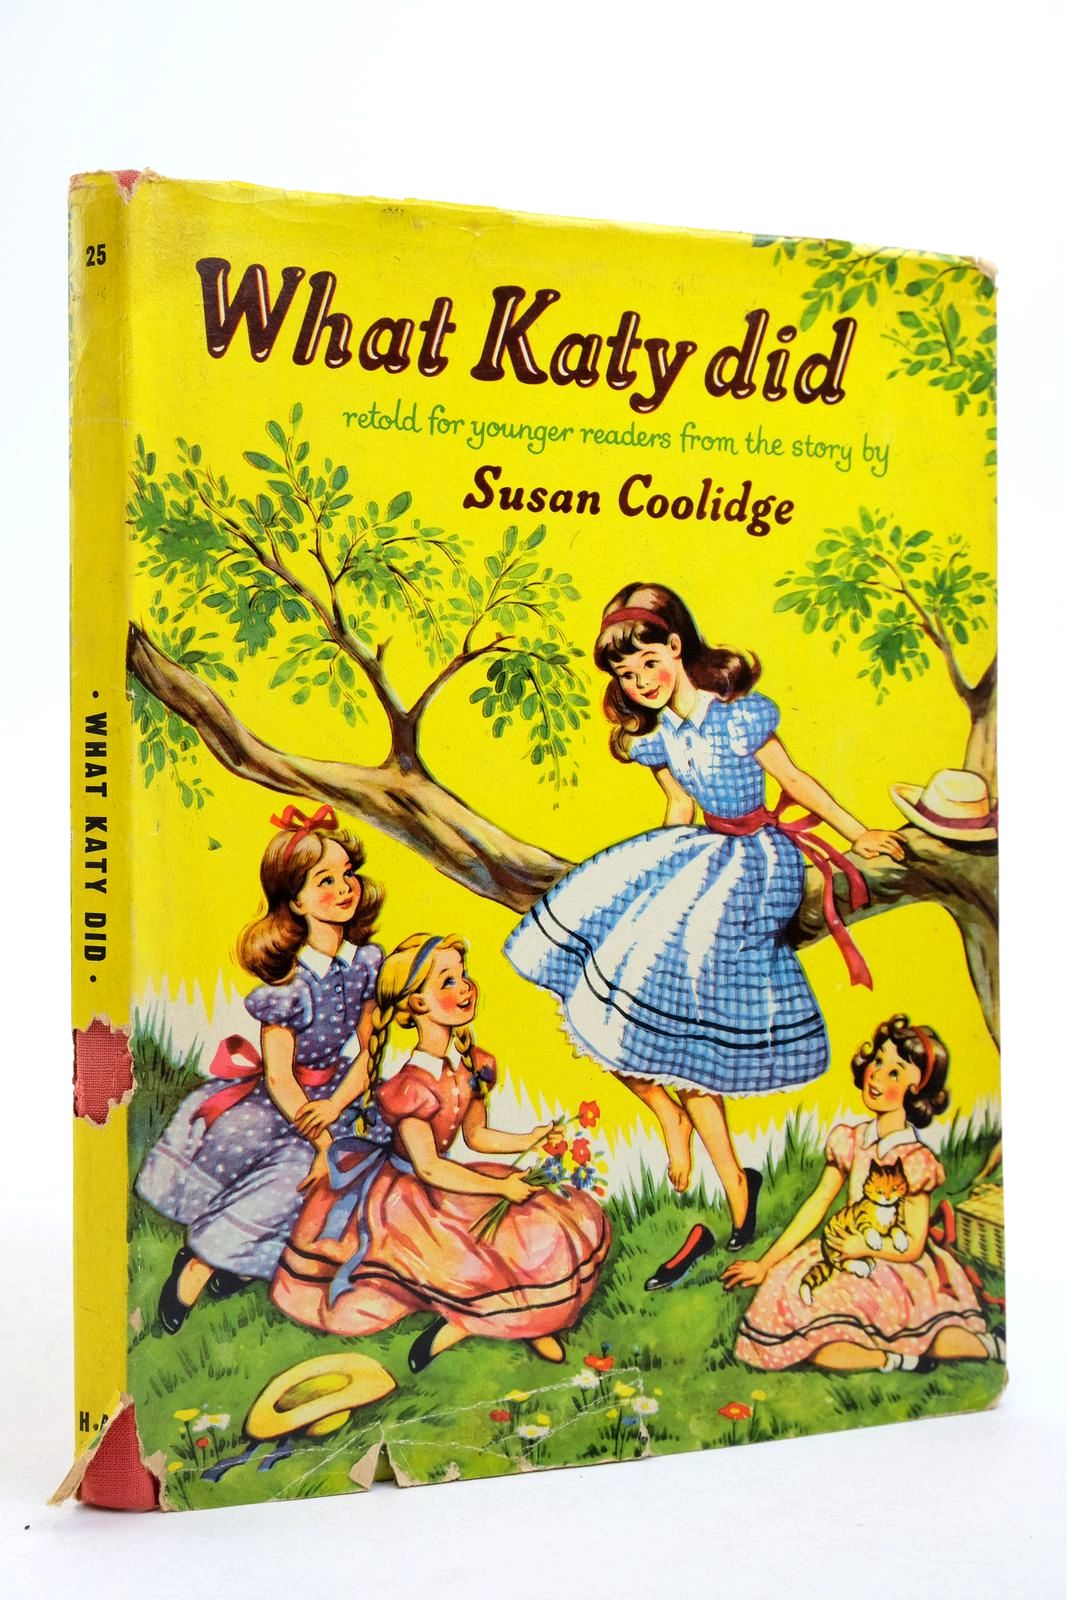 Photo of WHAT KATY DID written by Coolidge, Susan published by Hampster Books (STOCK CODE: 2140559)  for sale by Stella & Rose's Books